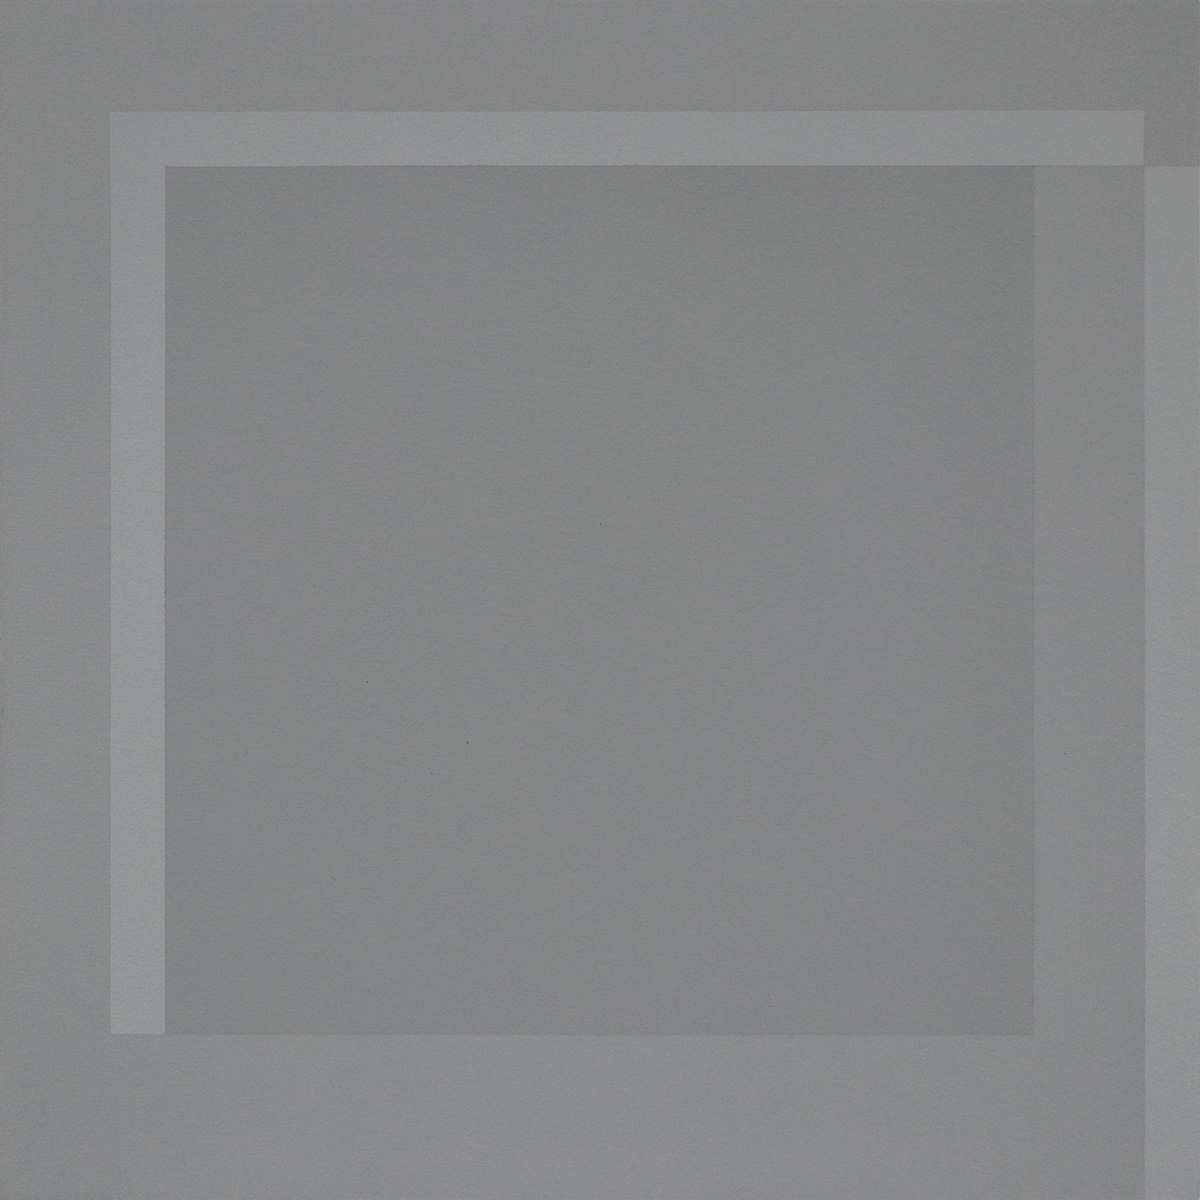 Dimensional painting 31 (grey), 200655 x 55 cmAcrylic on paper, mounted on aludibond